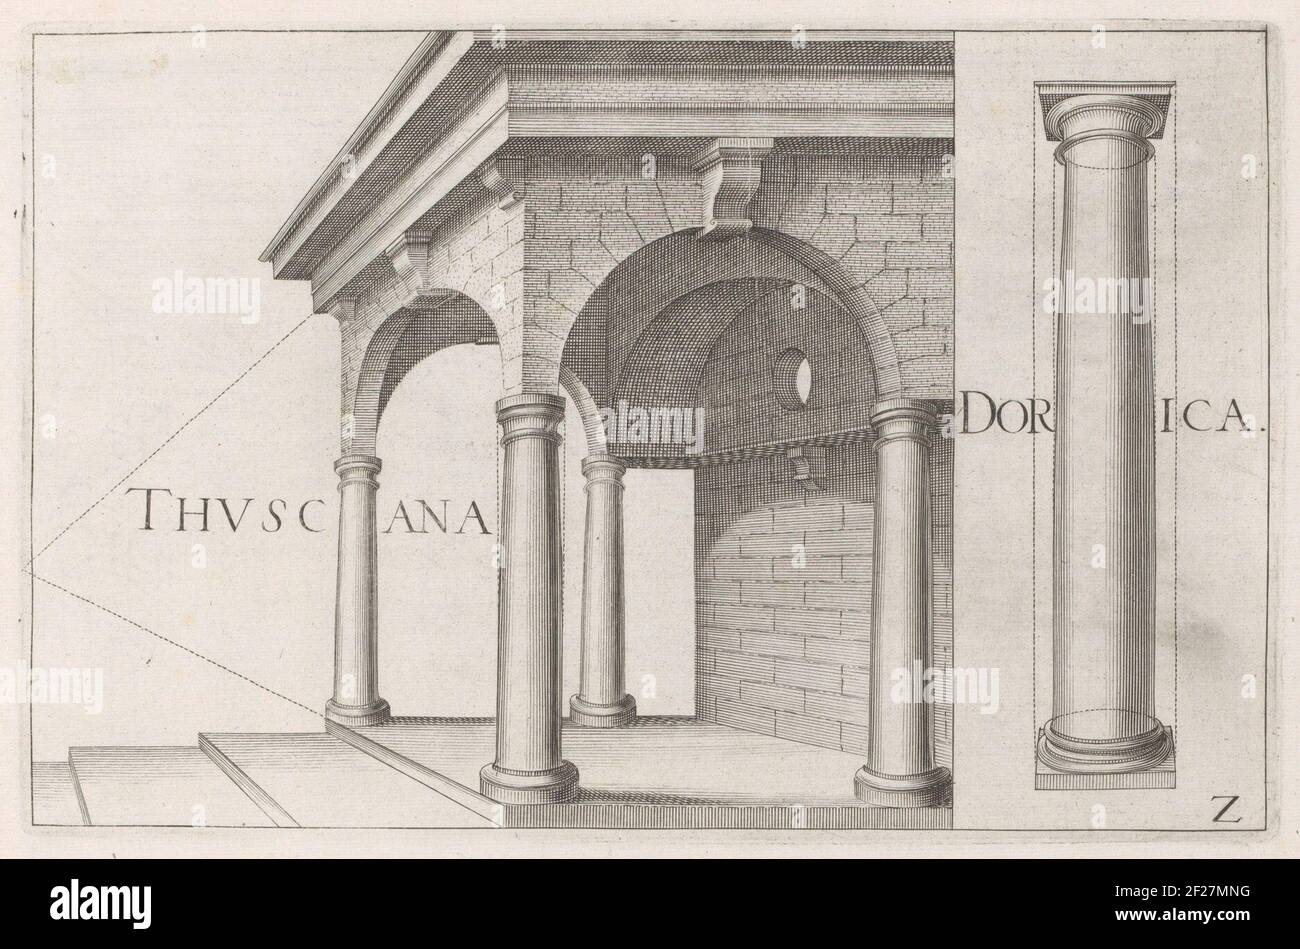 Porch with columns of the Tuscan order; Thuscana Dorica; Architectura.porch with Columns of the Tuscan Order and a Column of the Doric Order. Bottom Right: Z. Prent is part of an album. Stock Photo